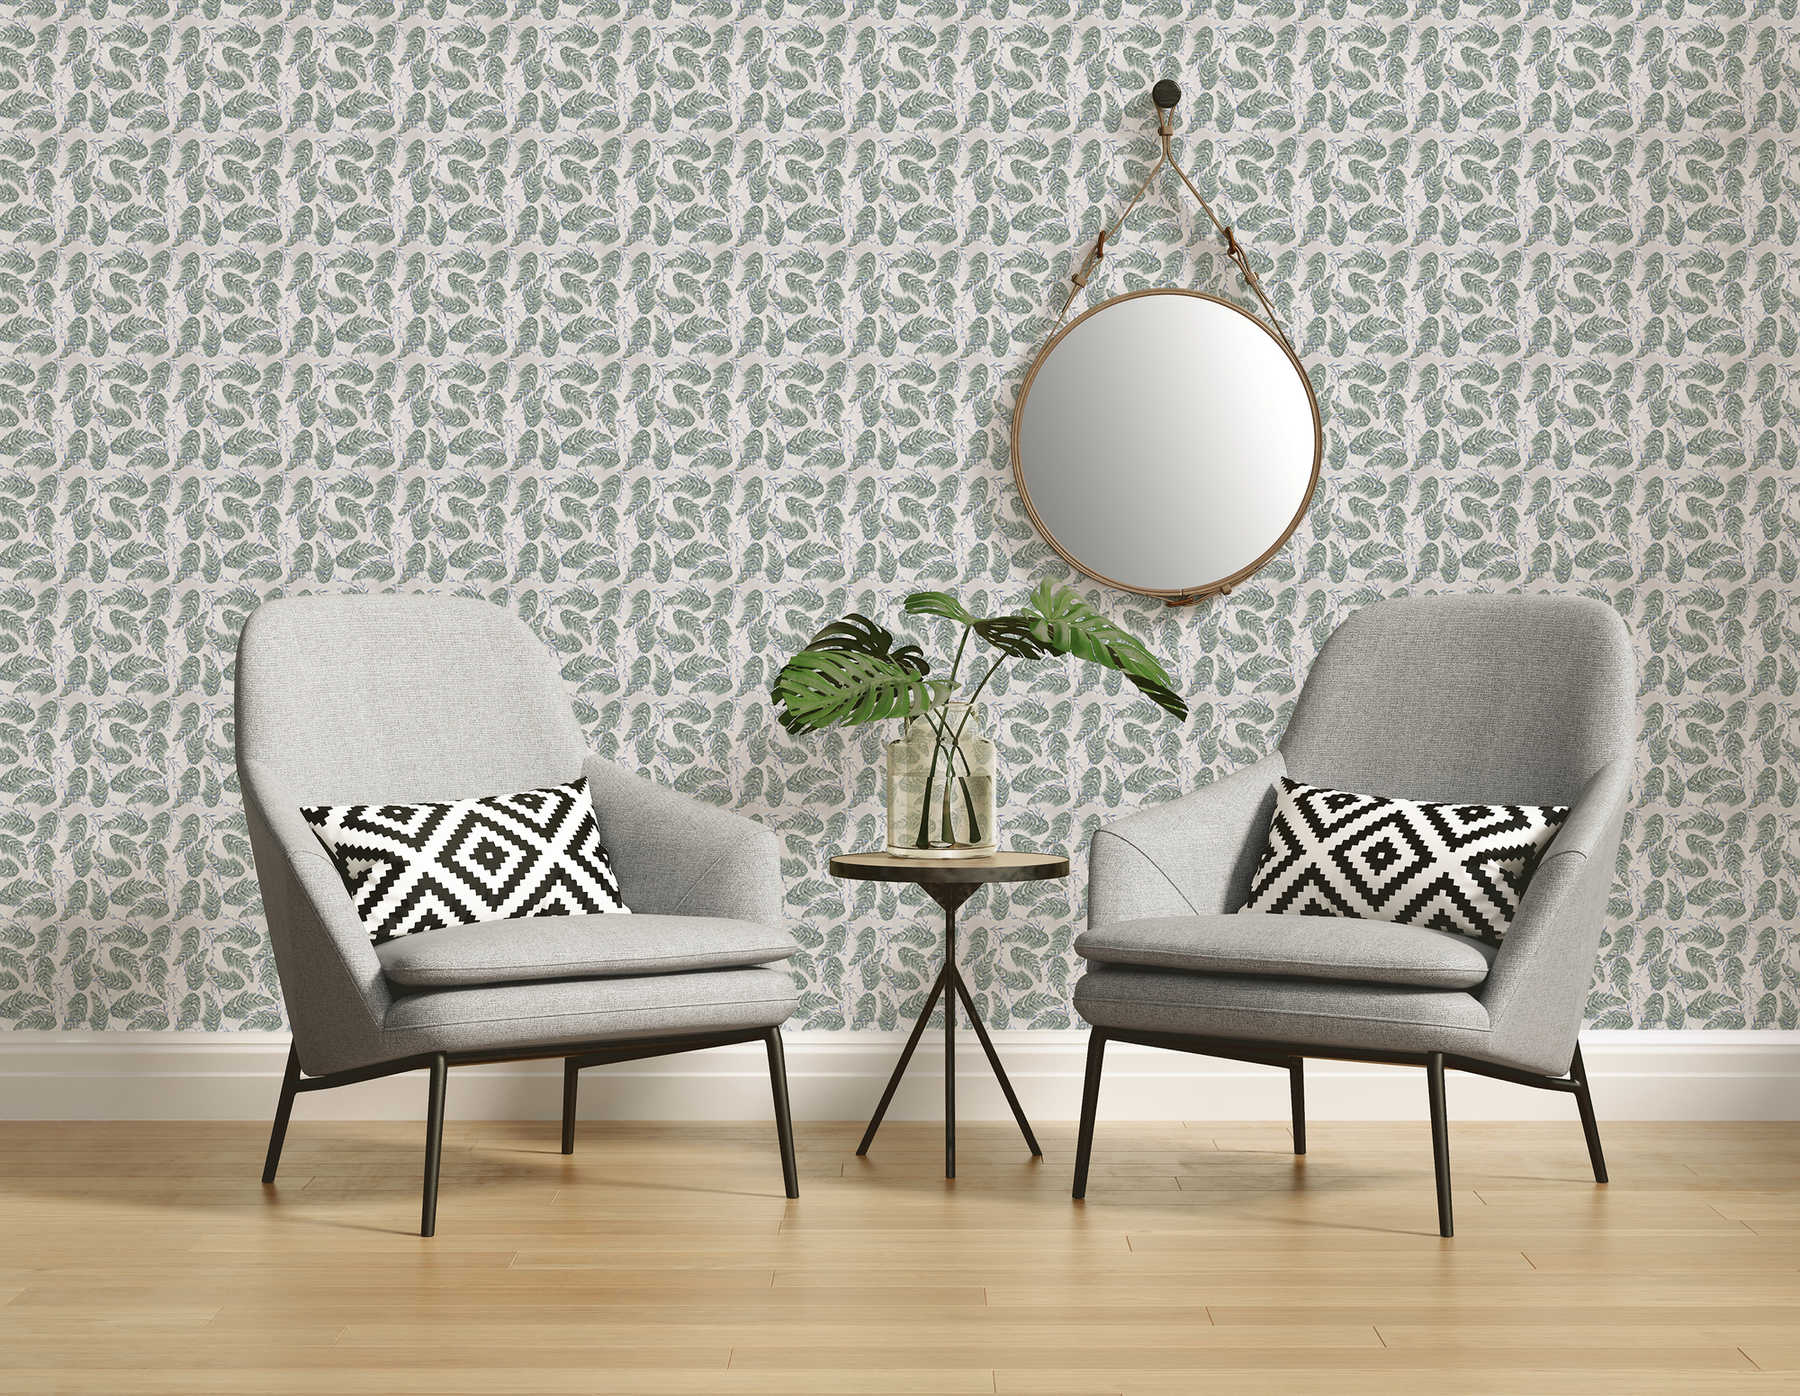             Design wall mural with floral pattern in grey and green on textured non-woven
        